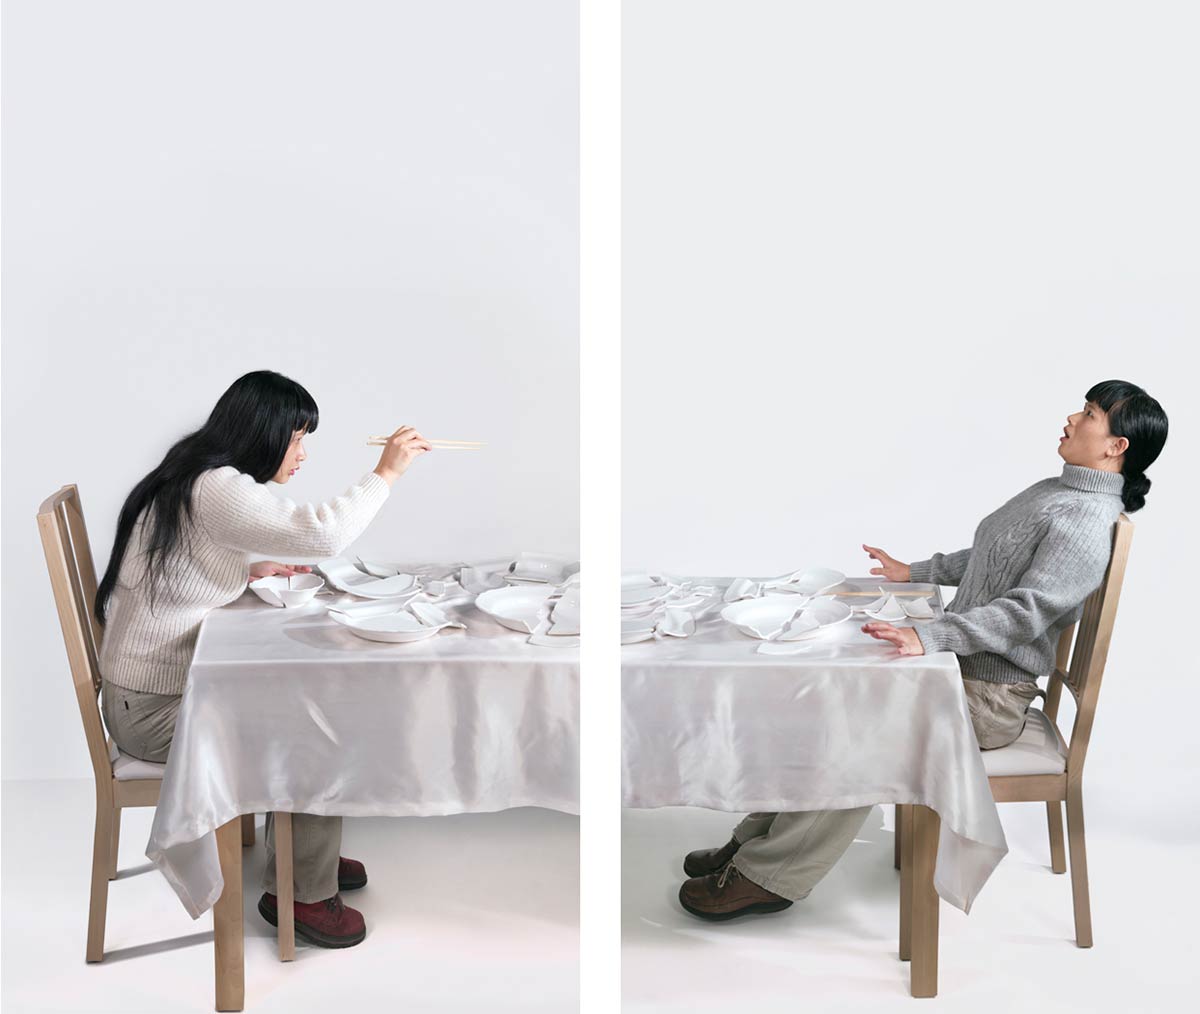 Chun Hua Catherine Dong uses her body to play a couple in domestic lives: she wears the husband’s clothing to present his presence. wife is left and husband is right.